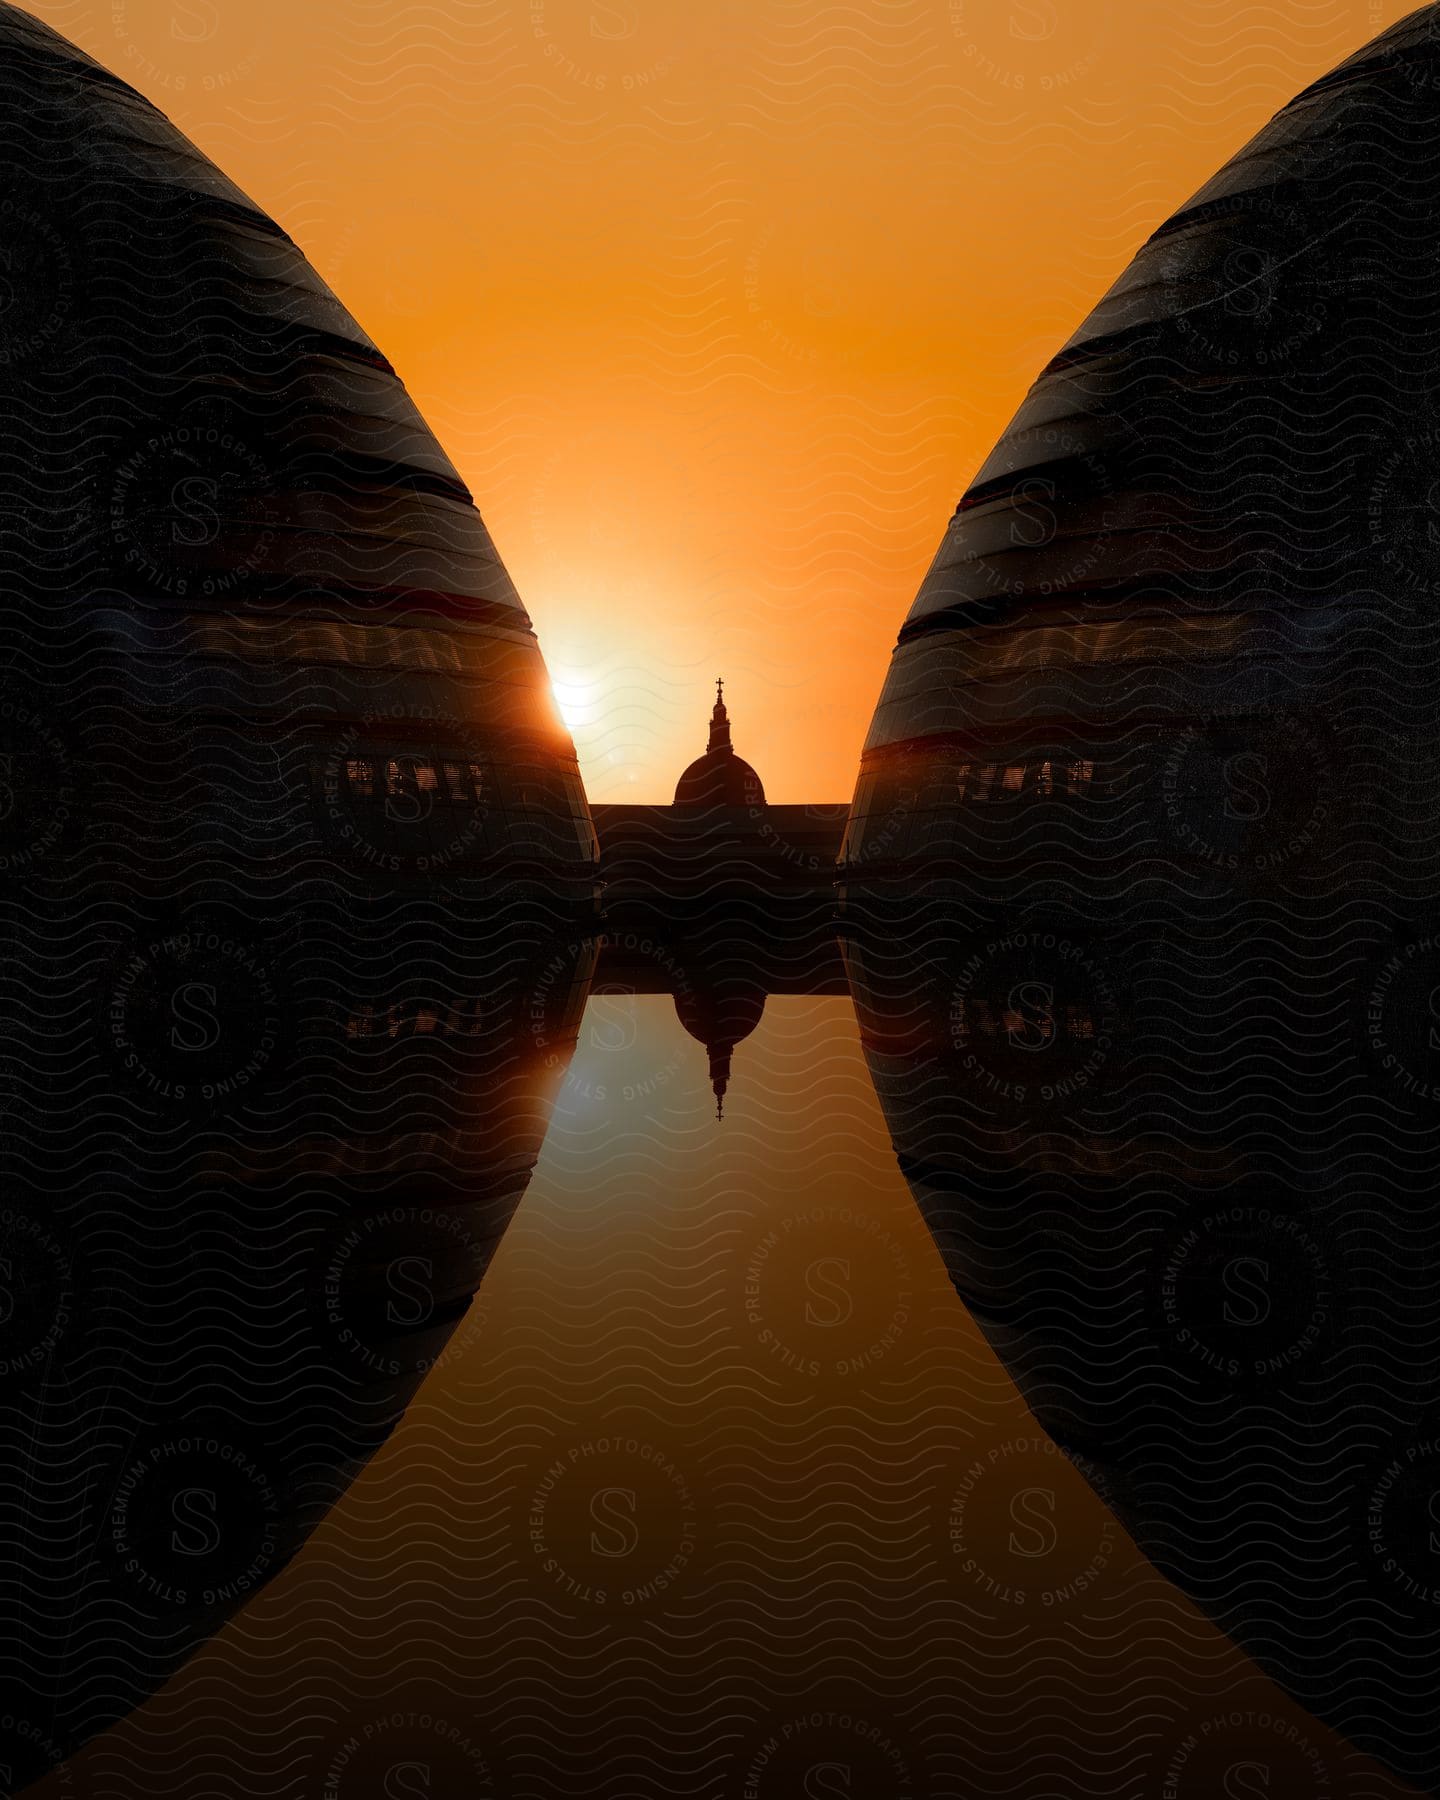 Stock photo of in between two large spherical buildings, the dome of a landmark building is illuminated by the sun which is set low in the sky.